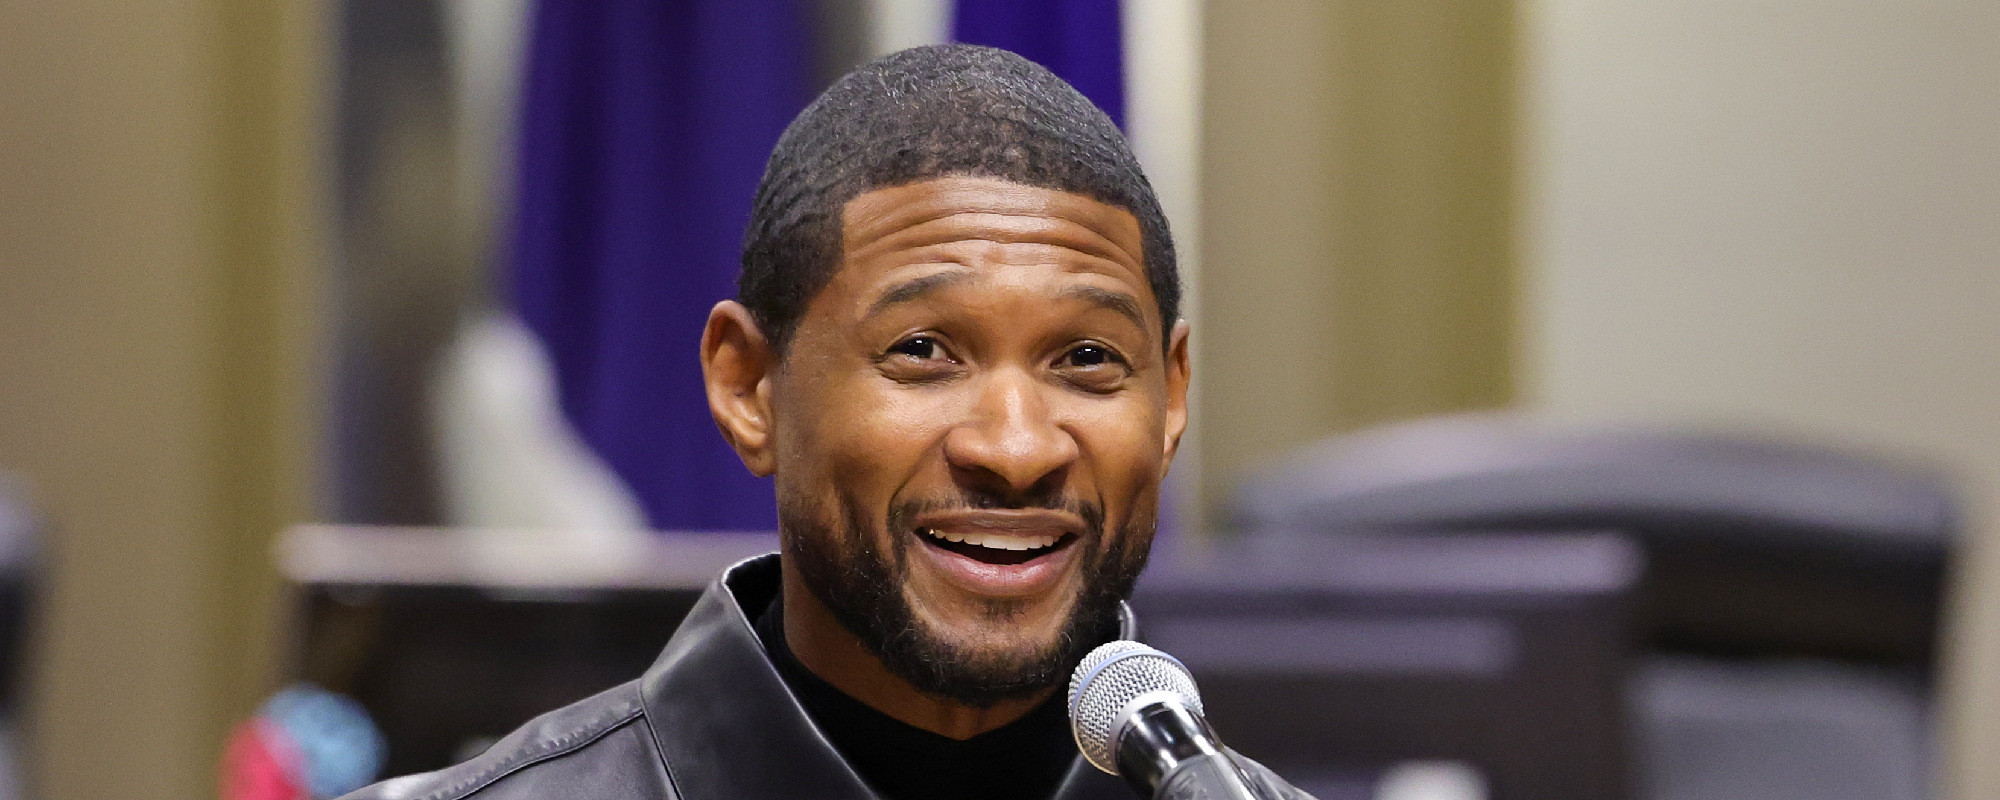 Usher Reveals How Jay-Z Spawned His Super Bowl Performance, Discloses Track List for New Album